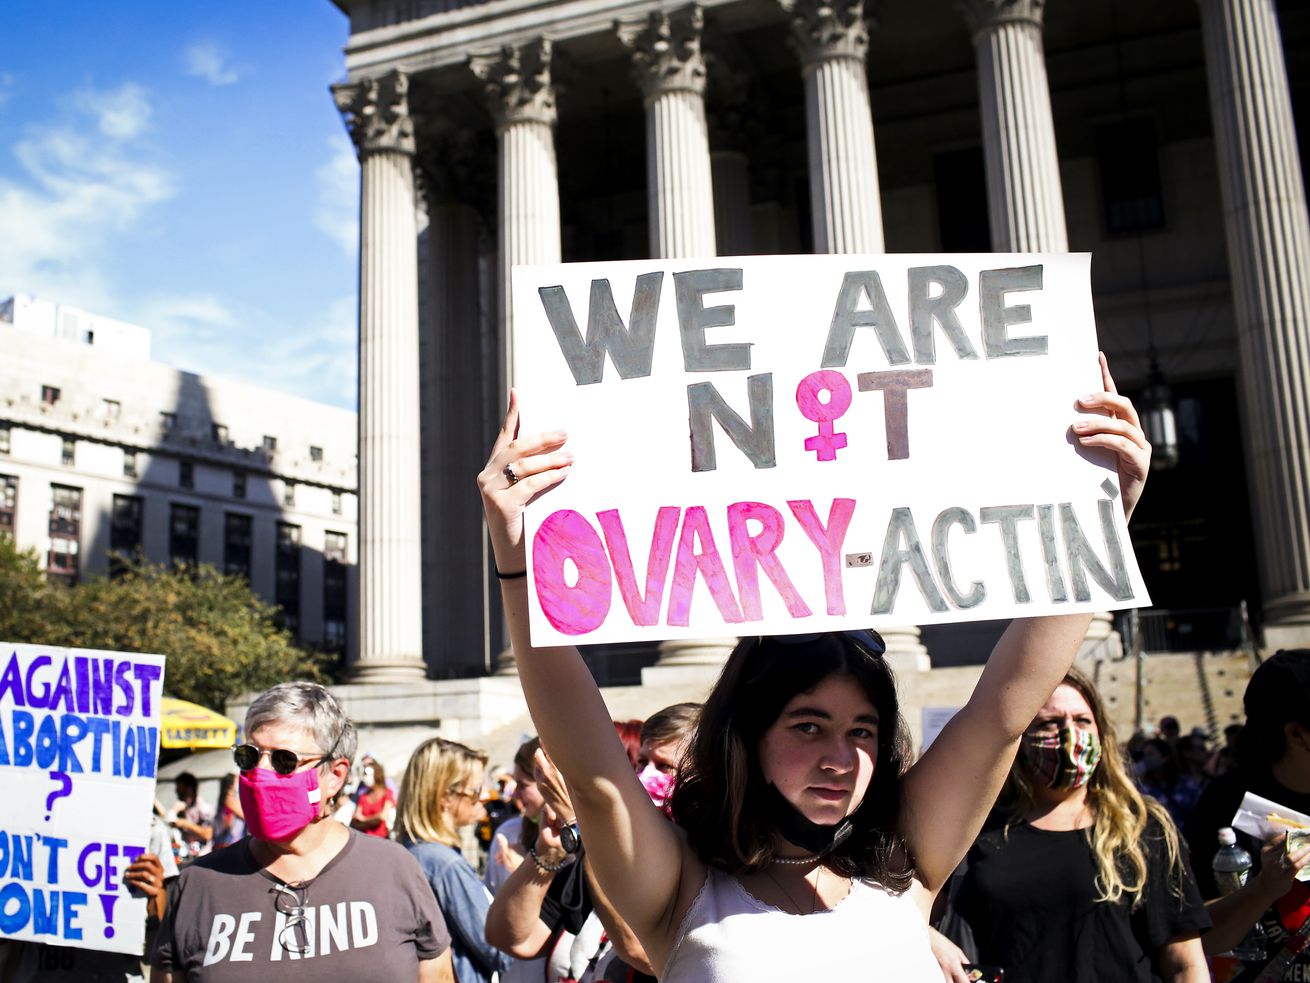 Texas’s anti-abortion law is back at SCOTUS. Here’s what’s different this time around.